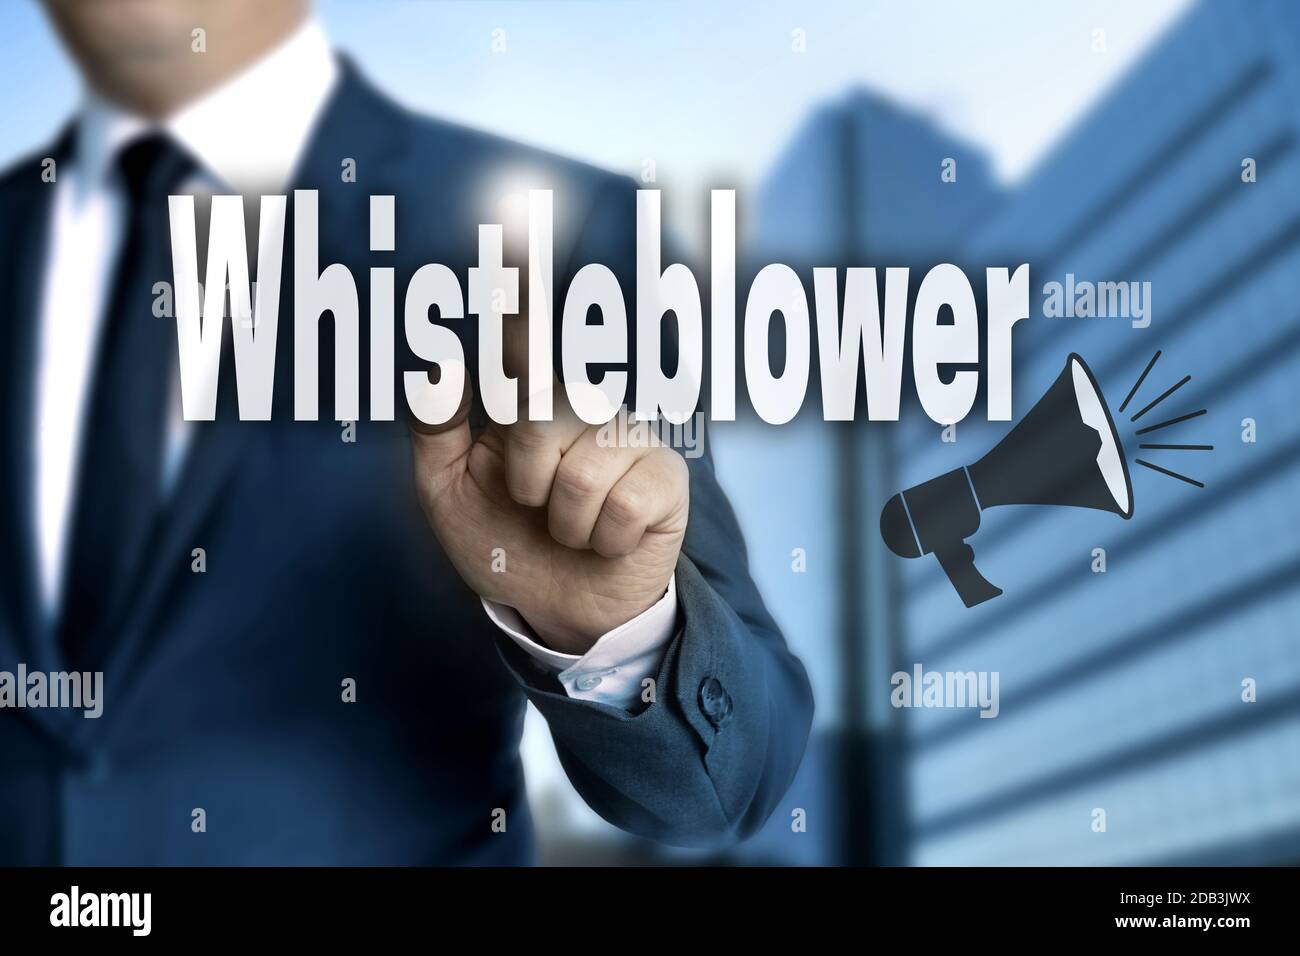 Whistleblower touchscreen is operated by businessman. Stock Photo